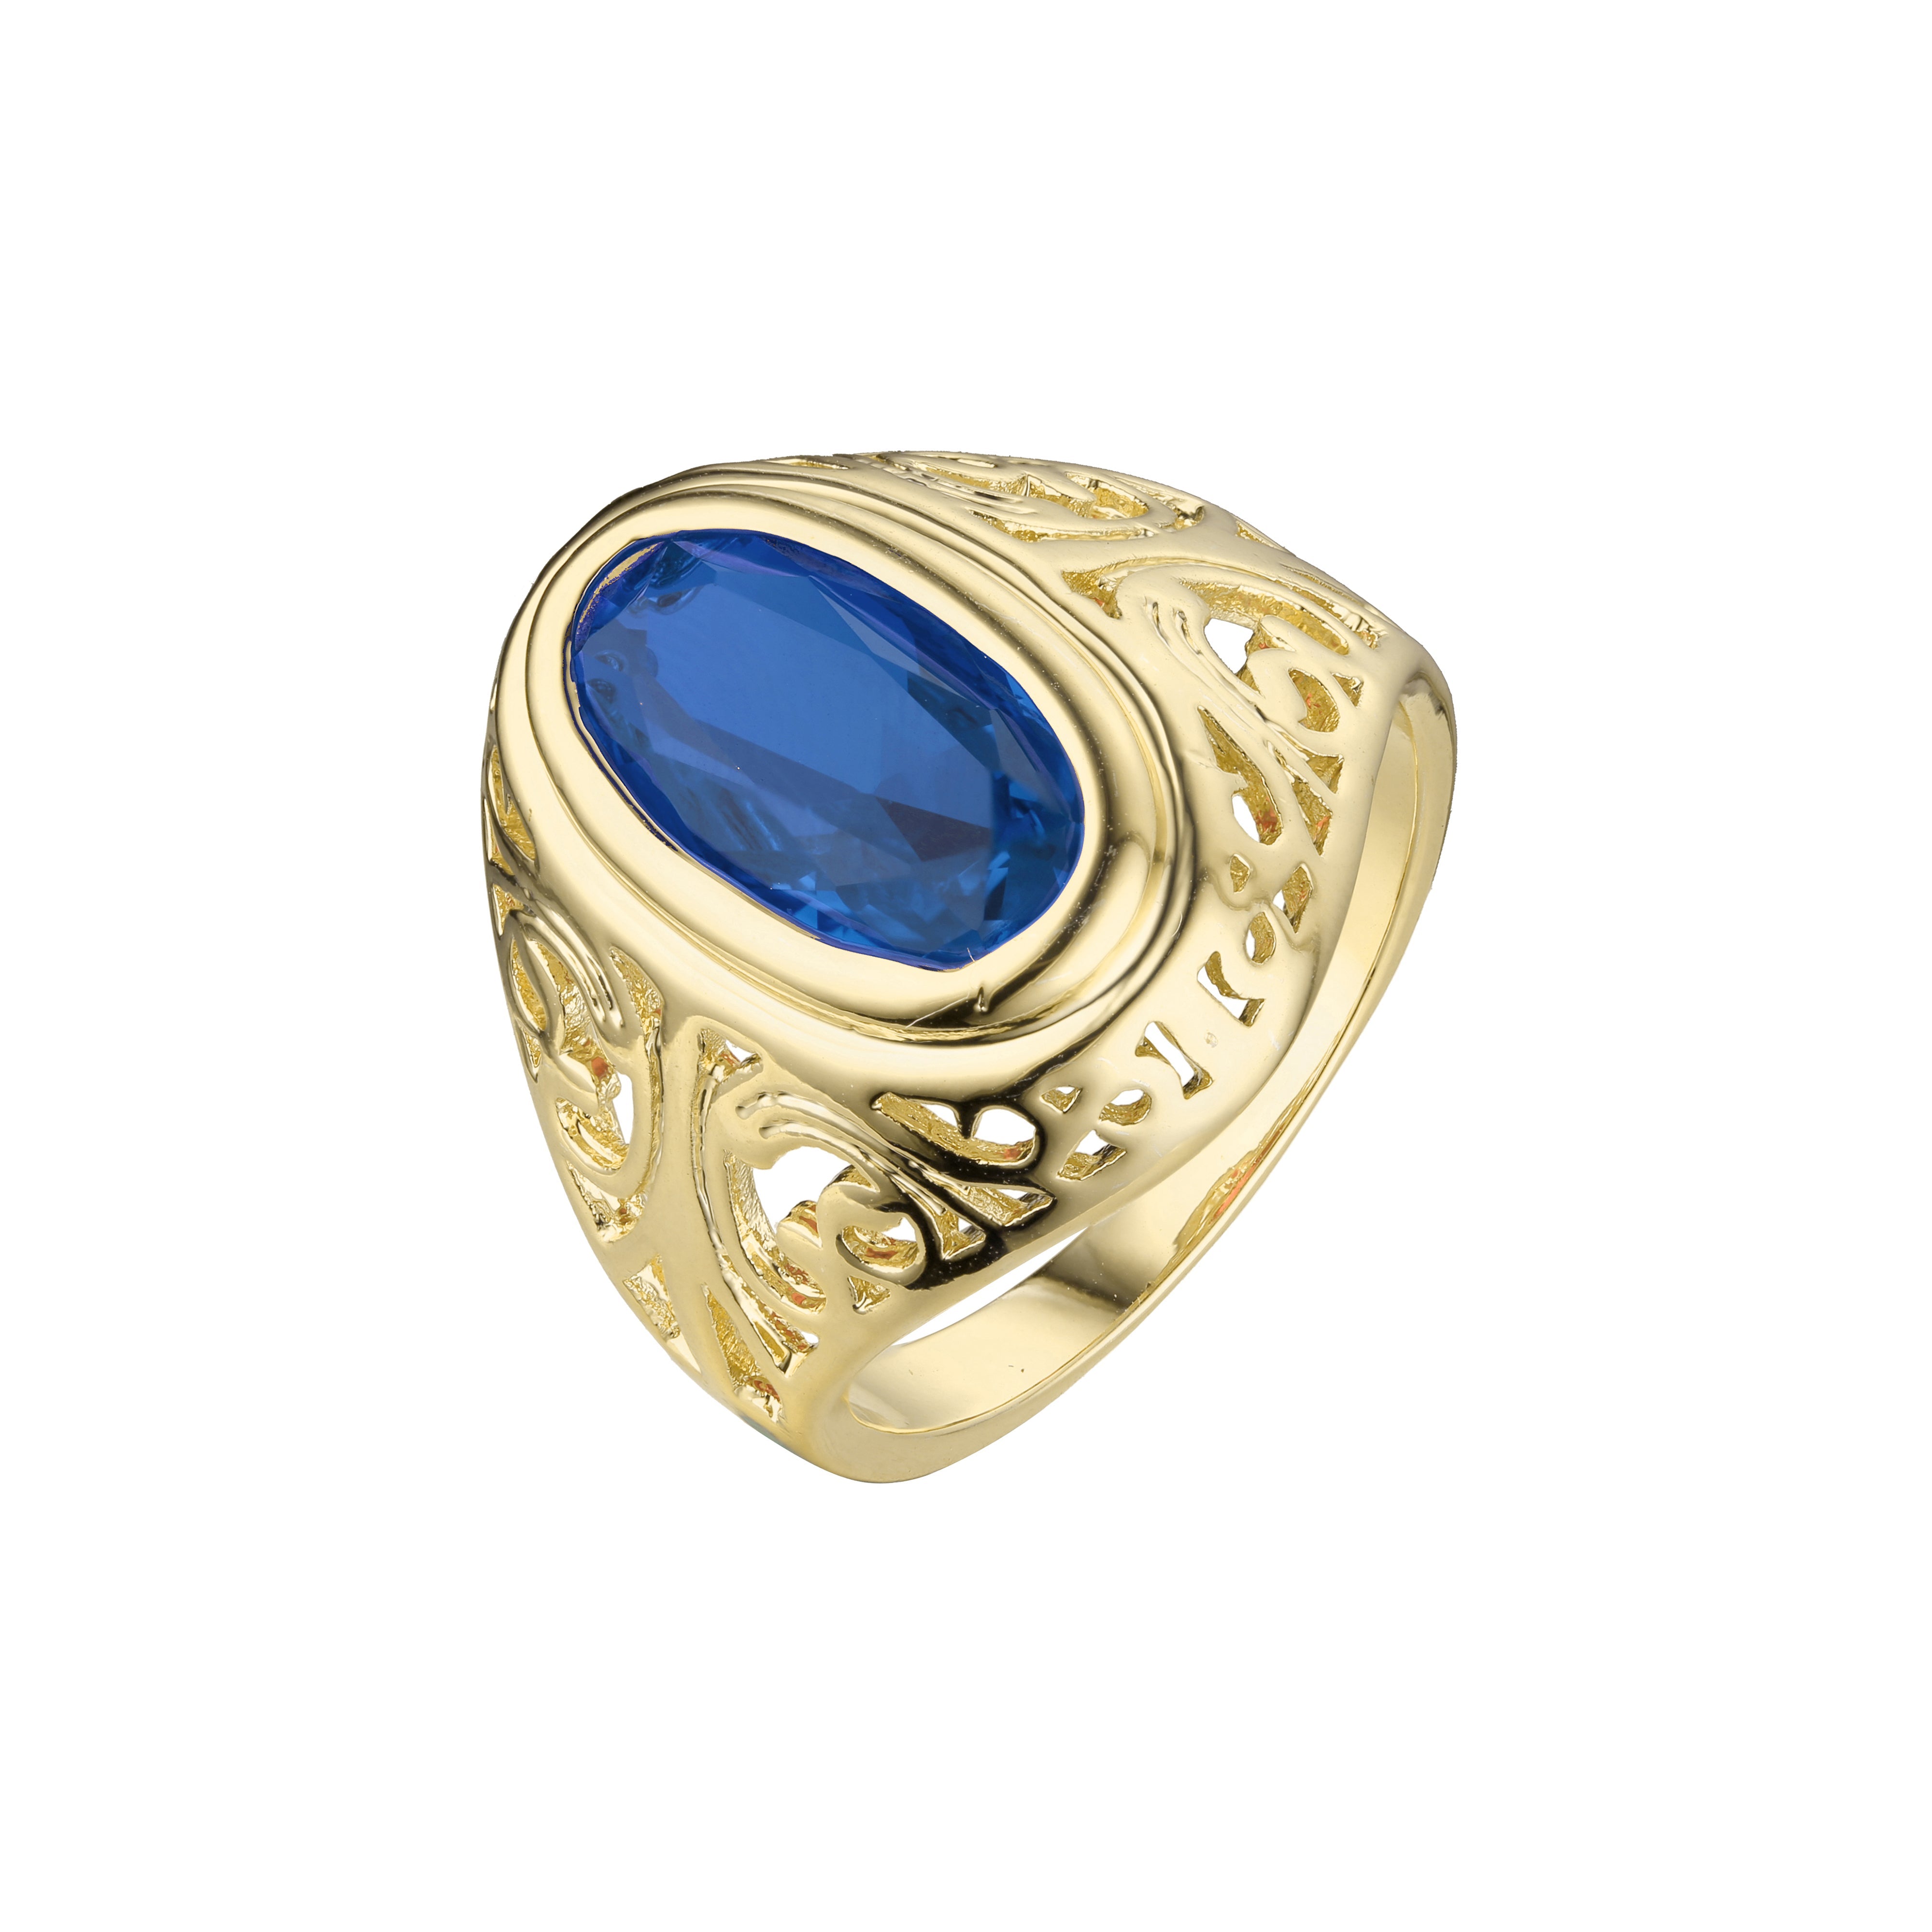 .Opal's Eye - Big stone solitaire men's rings in 18K Gold, 14K Gold, Rose Gold plating colors